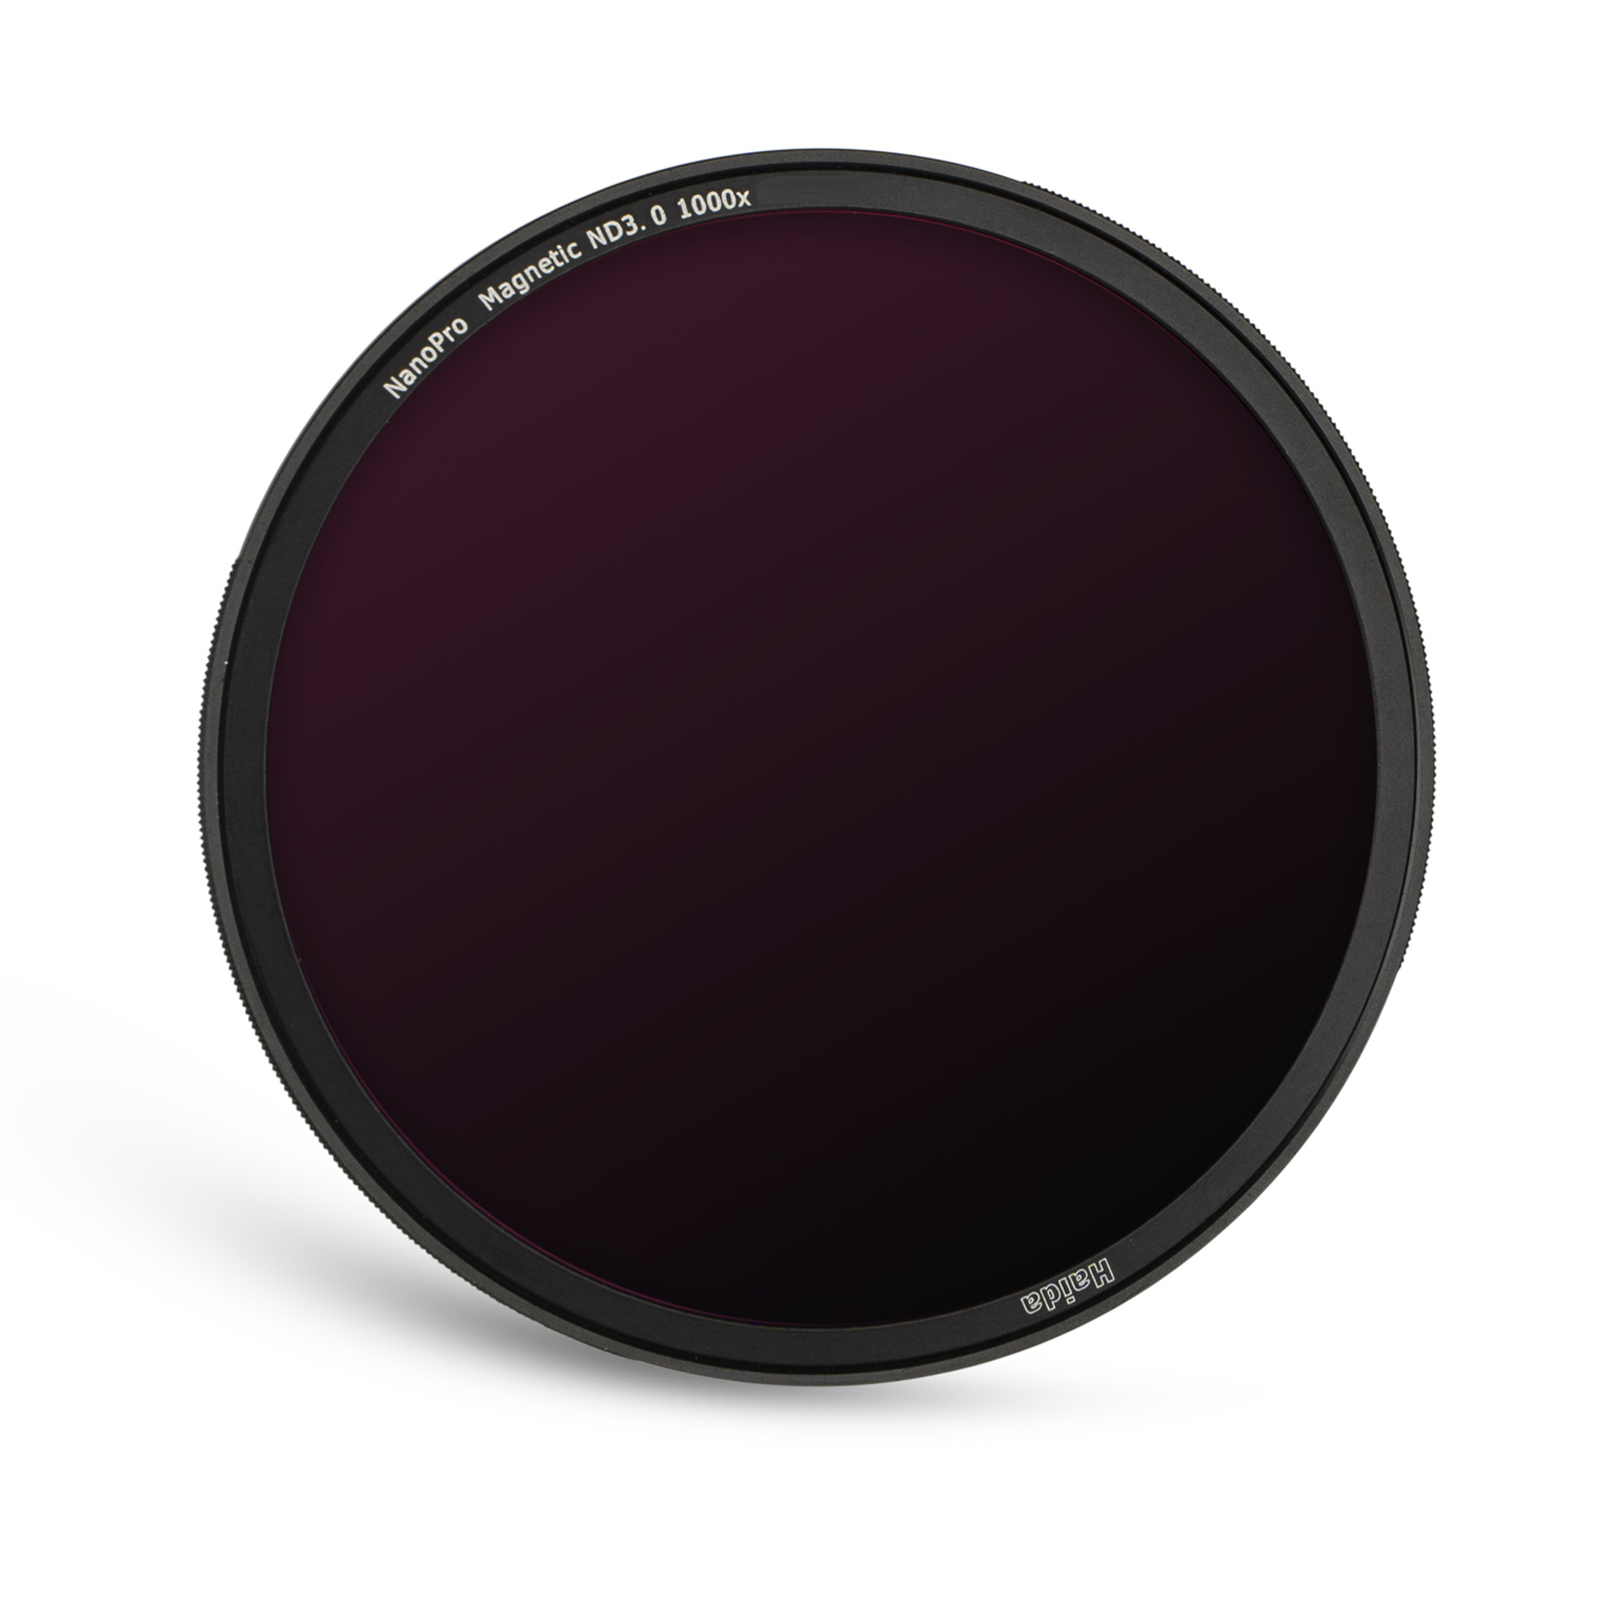 67mm Haida NanoPro Magnetic ND3.0 (1000x) Filter with Adapter Ring - 10 Stop main image